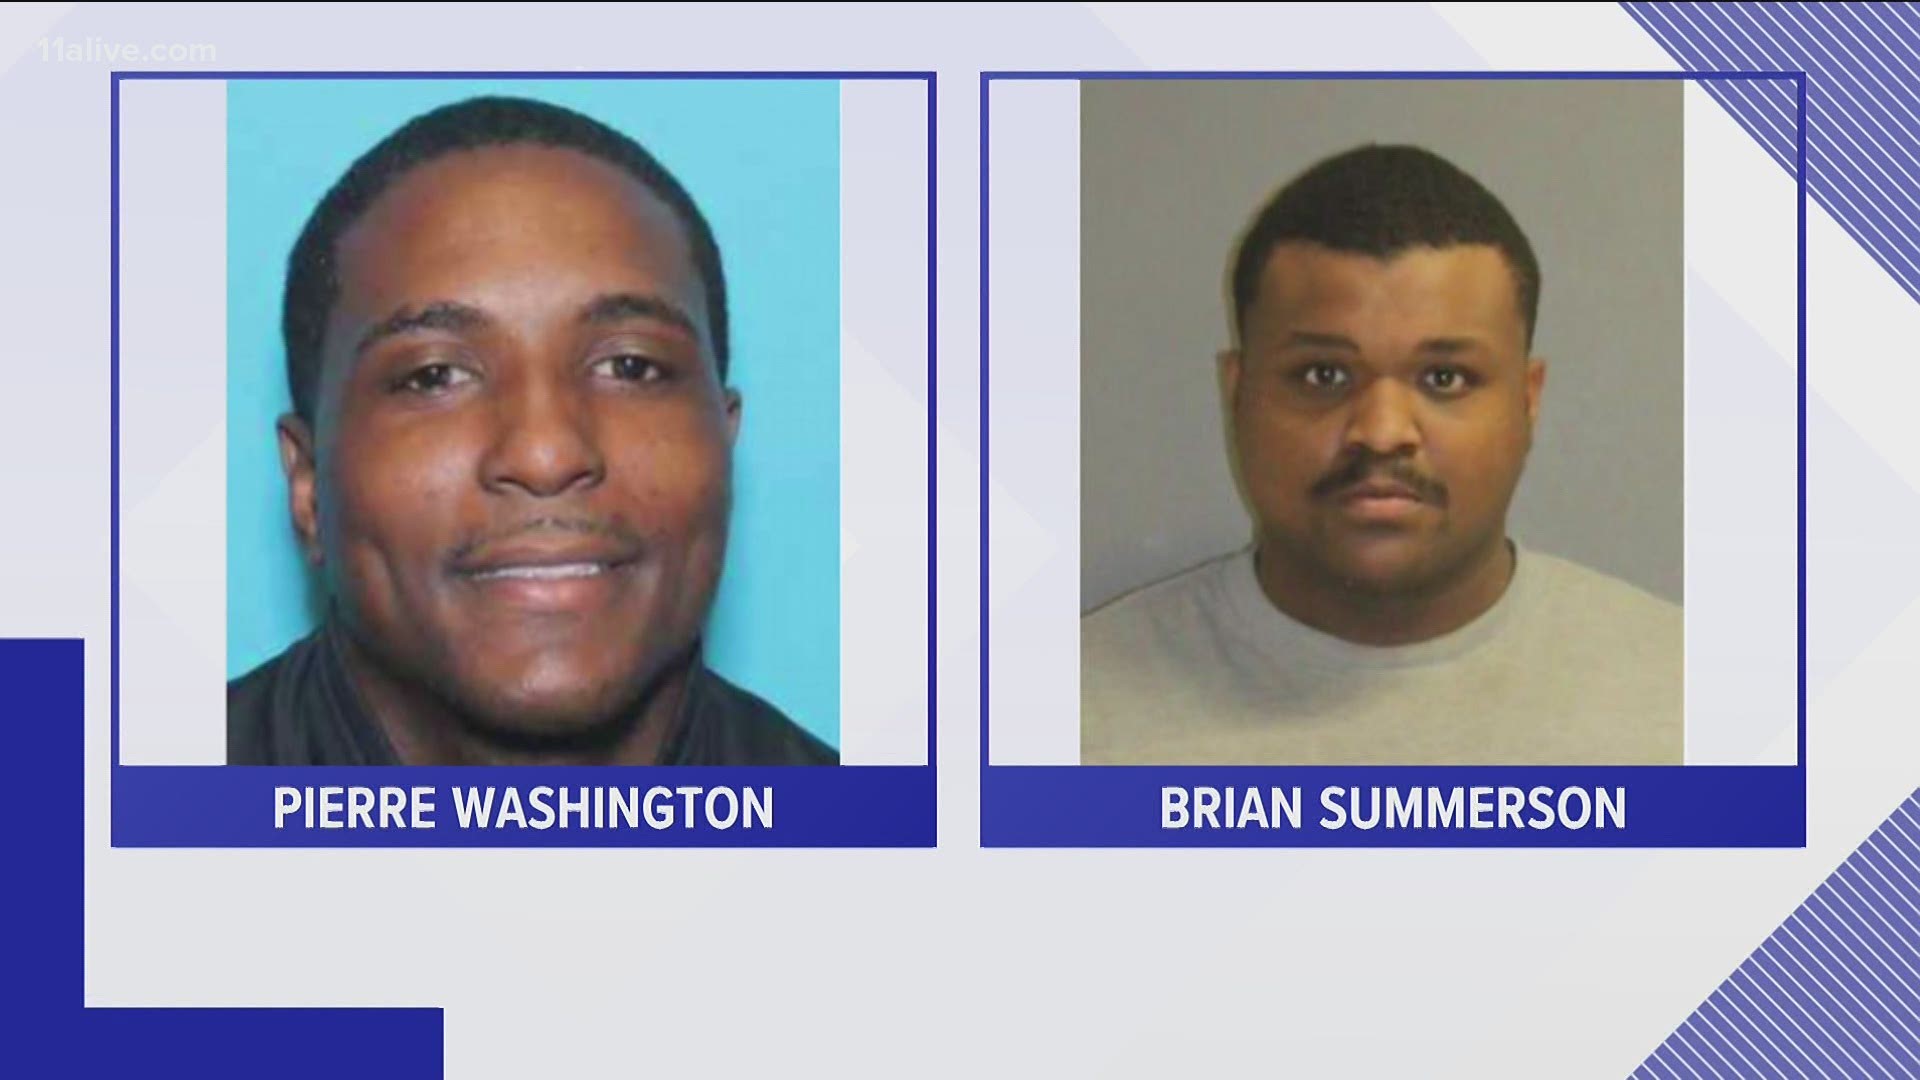 The FBI is asking the public for additional information about two truck drivers who allegedly kidnapped women along their routes and held them for ransom.